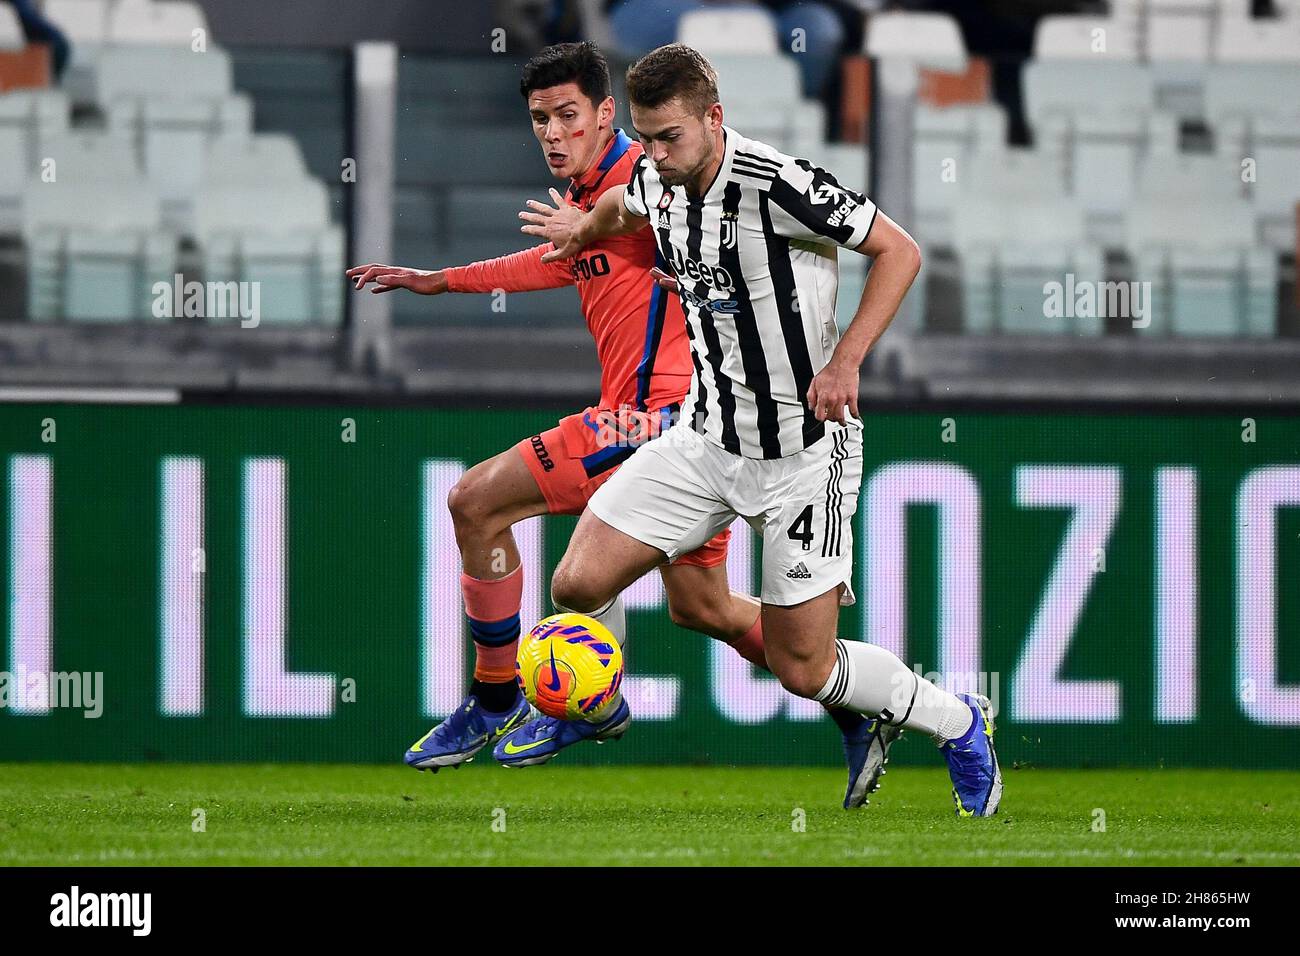 Turin, Italy. 27 November 2021. Matthijs de Ligt of Juventus FC is challenged by Matteo Pessina of Atalanta BC during the Serie A football match between Juventus FC and Atalanta BC. Credit: Nicolò Campo/Alamy Live News Stock Photo